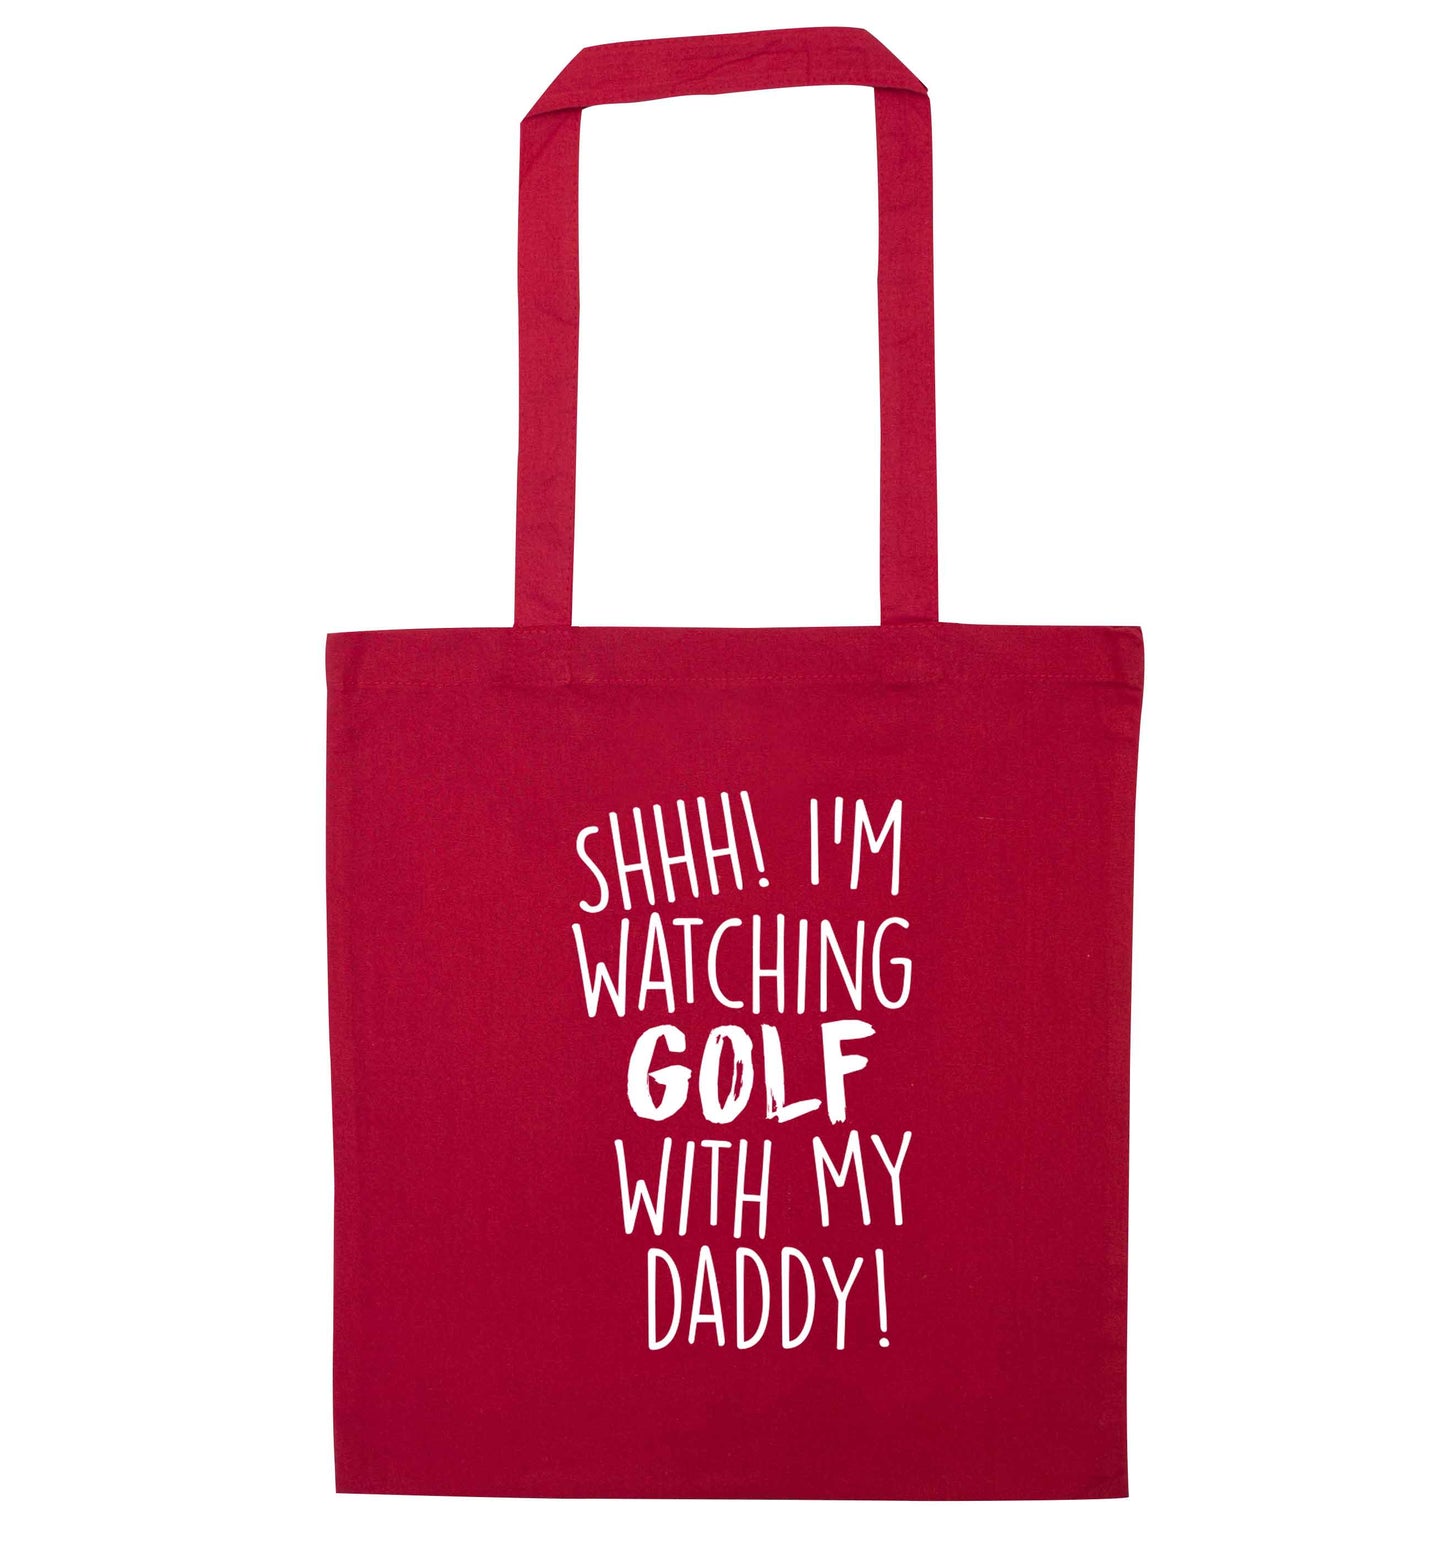 Shh I'm watching golf with my daddy red tote bag